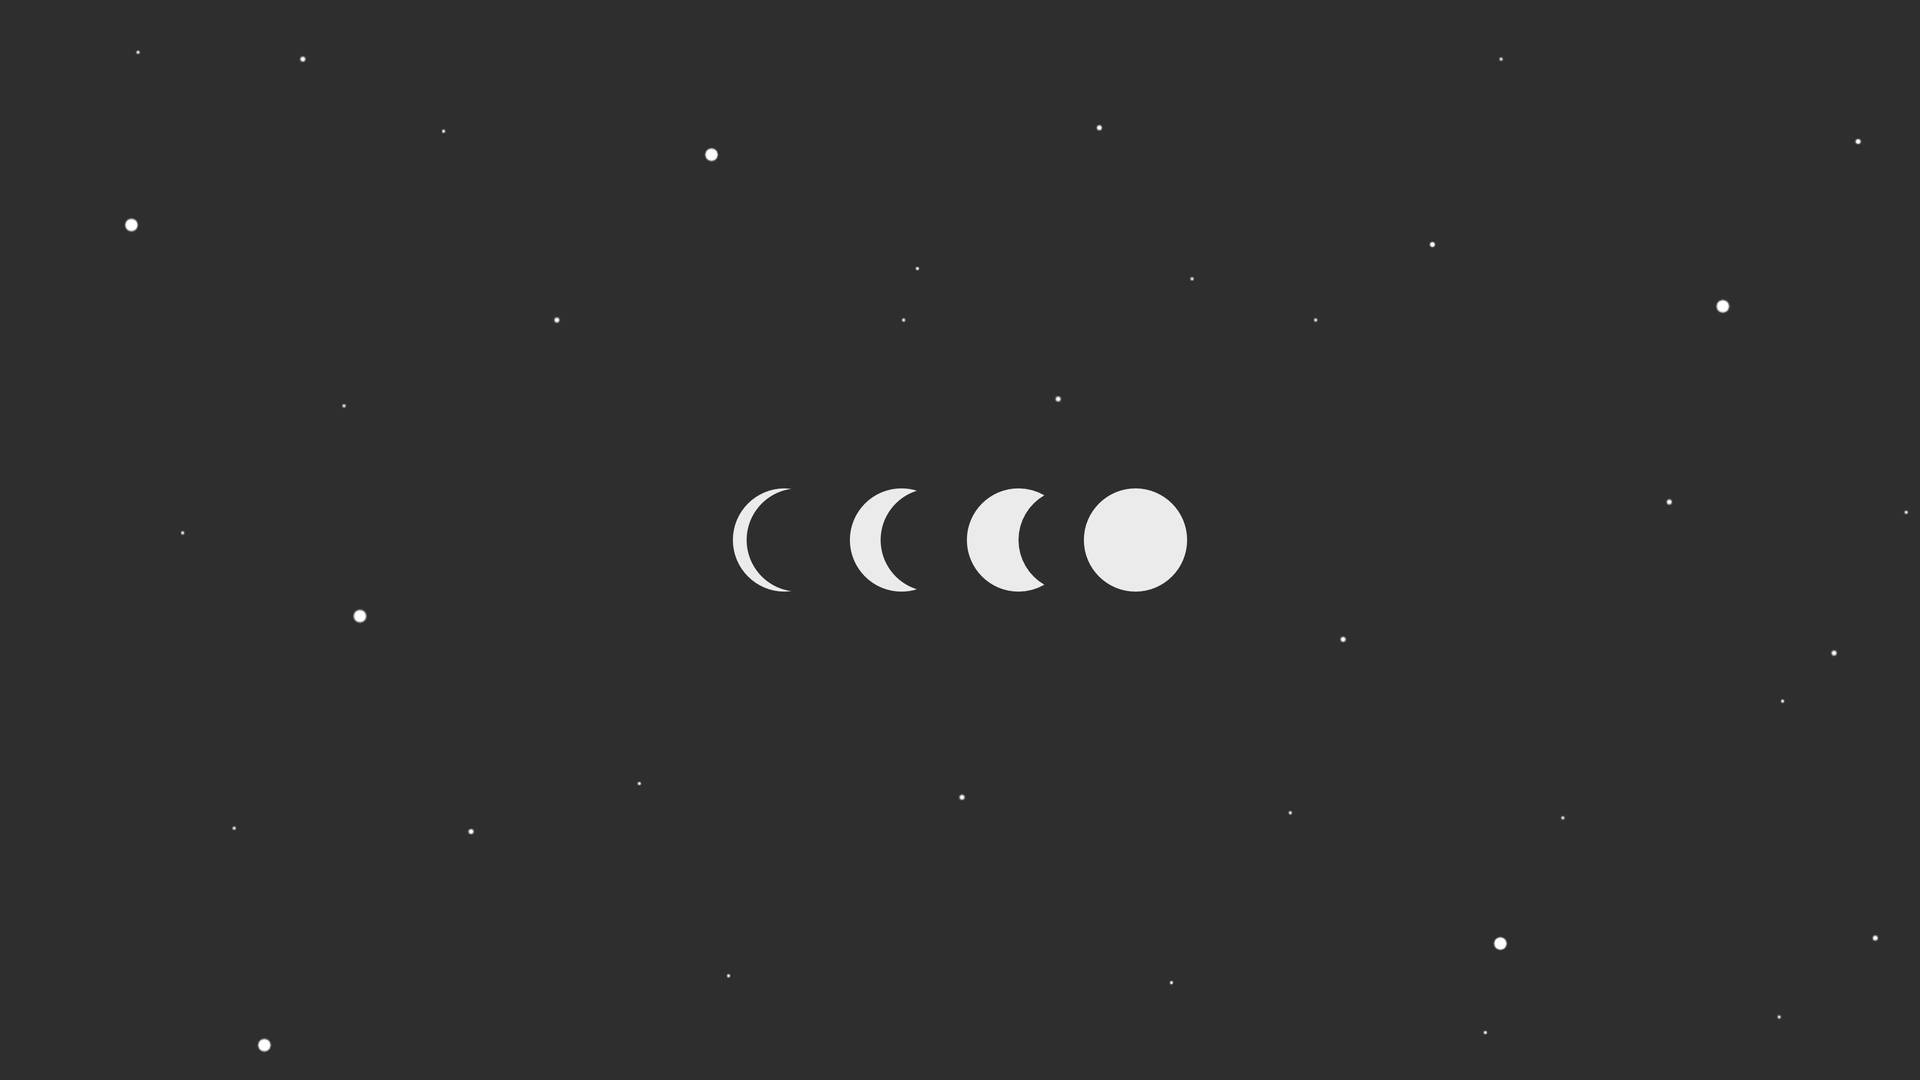 Fascinating Four Phases of the Moon Illustration. Wallpaper